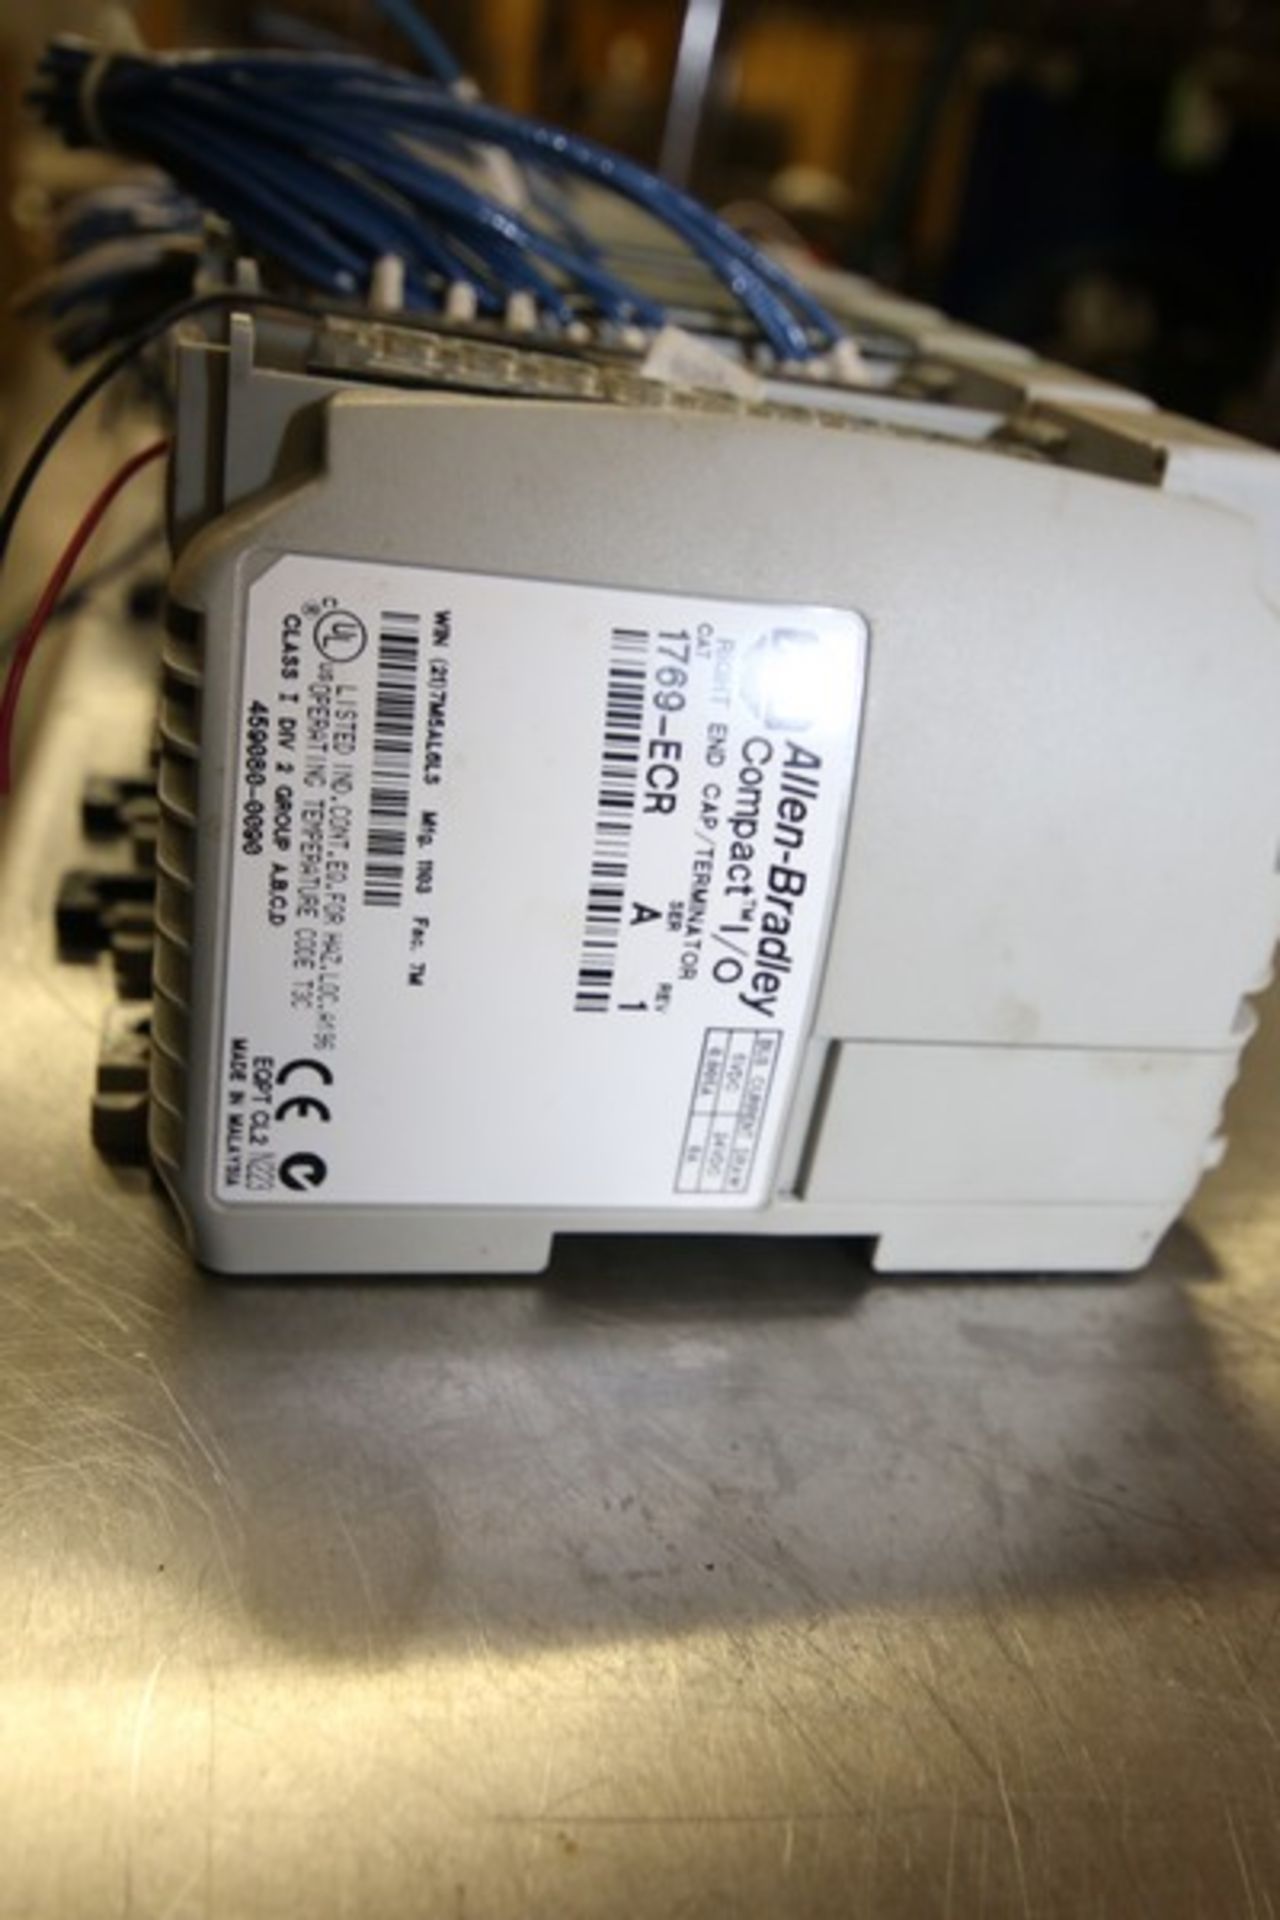 Allen Bradley Micro Logix 1500 PLC Controller Cat. No. 1769-ECR, Series A, with (6) Input & Outputs, - Image 3 of 5